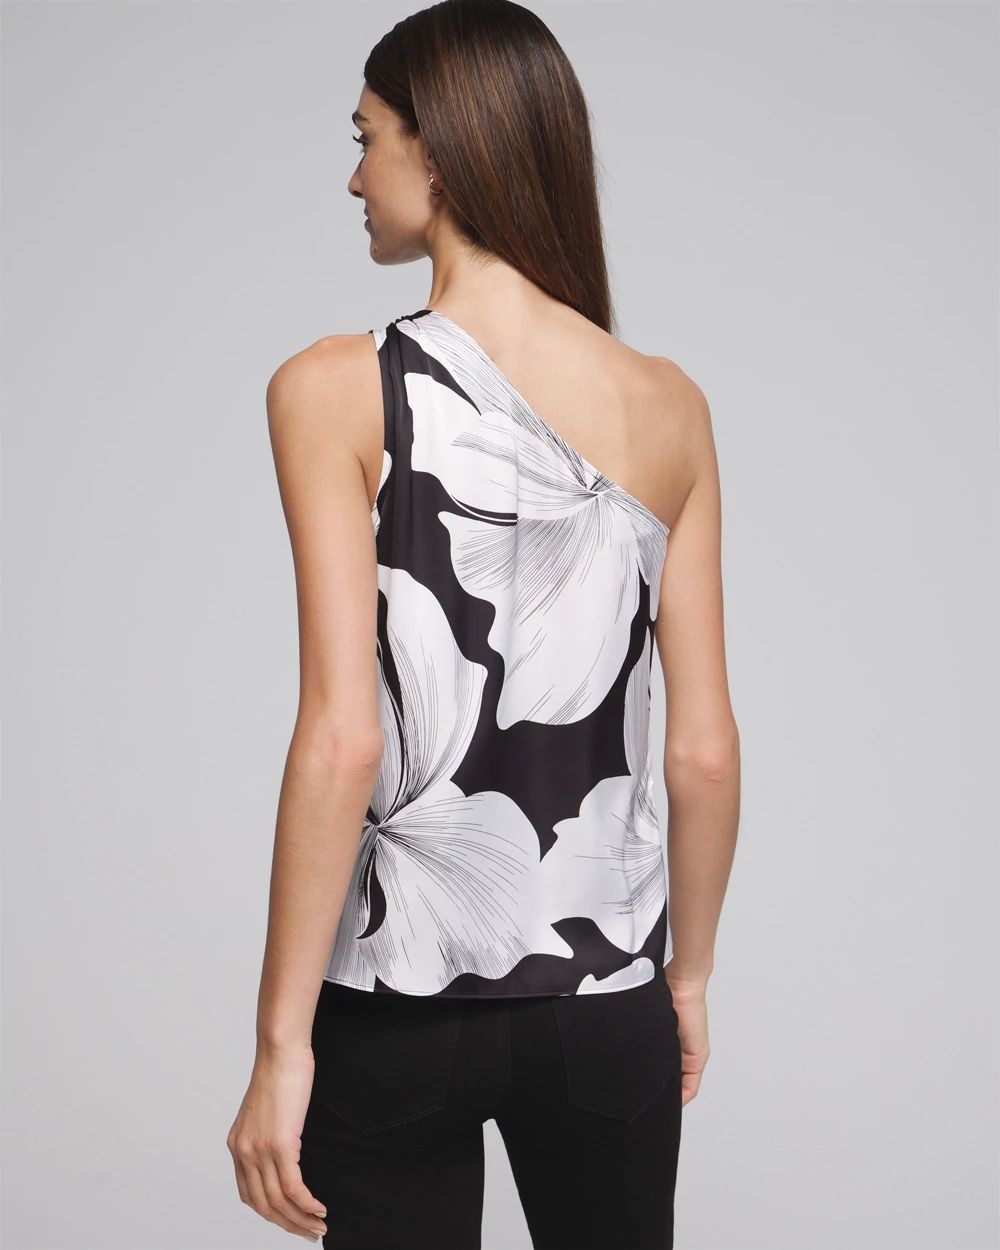 Outlet WHBM One-Shoulder Satin Top click to view larger image.